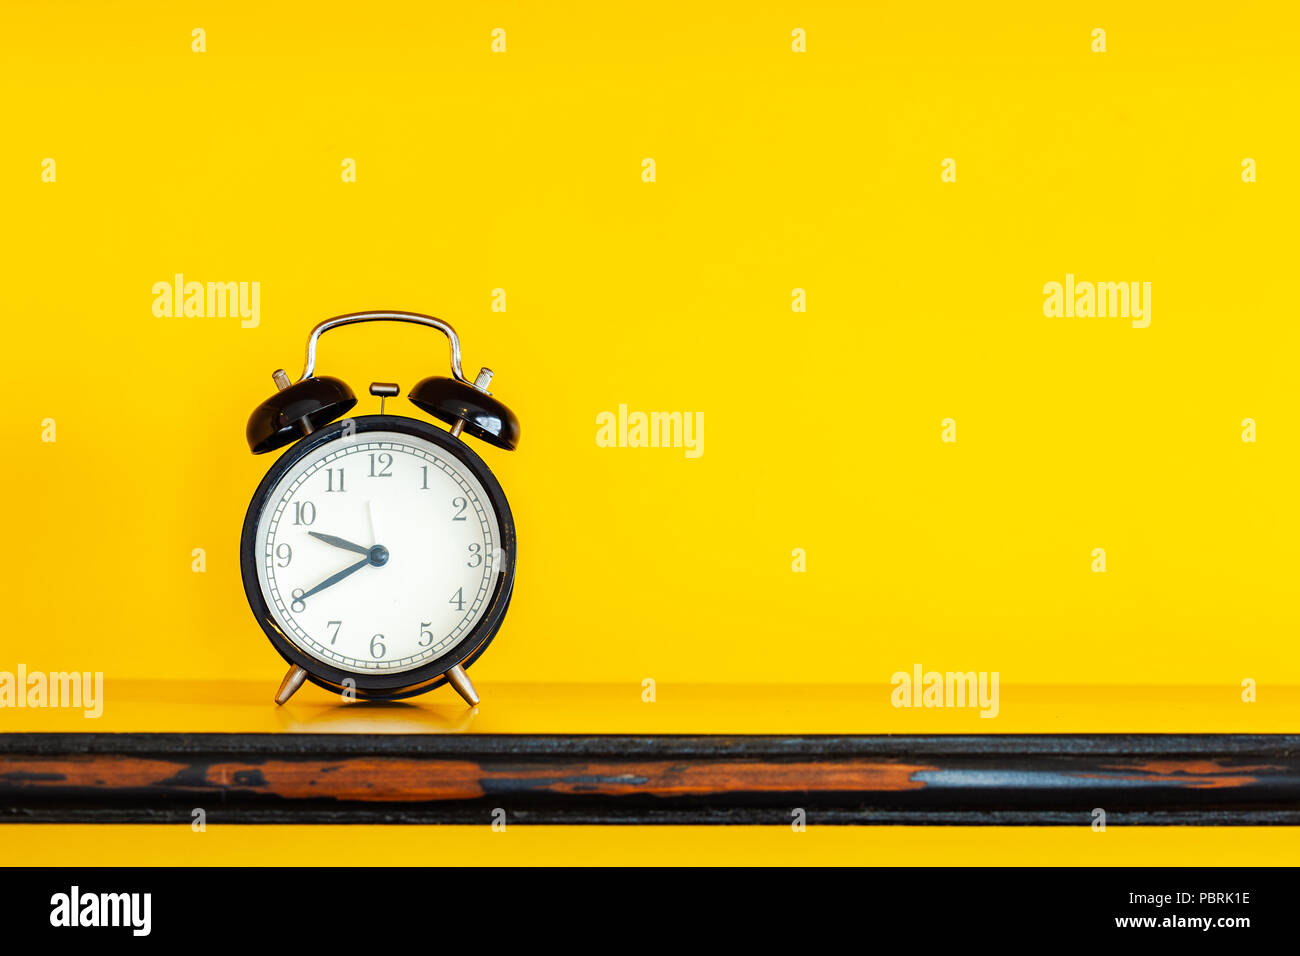 Alarm clock on yellow background with copy space. Stock Photo